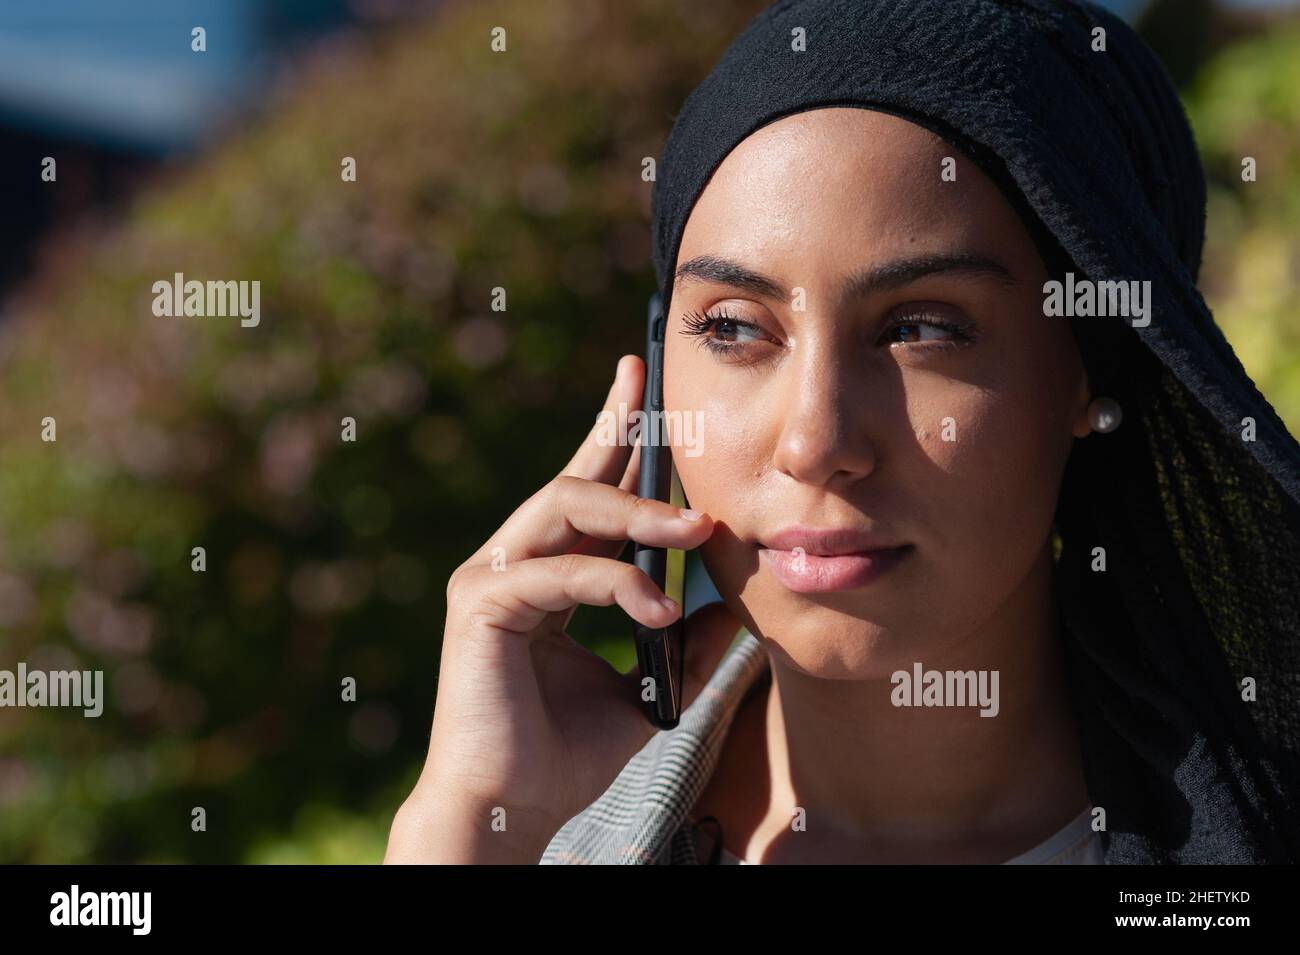 Close up view of an unsmiling muslim woman talking with her phone while looking at camera in the park in a sunny day. Stock Photo